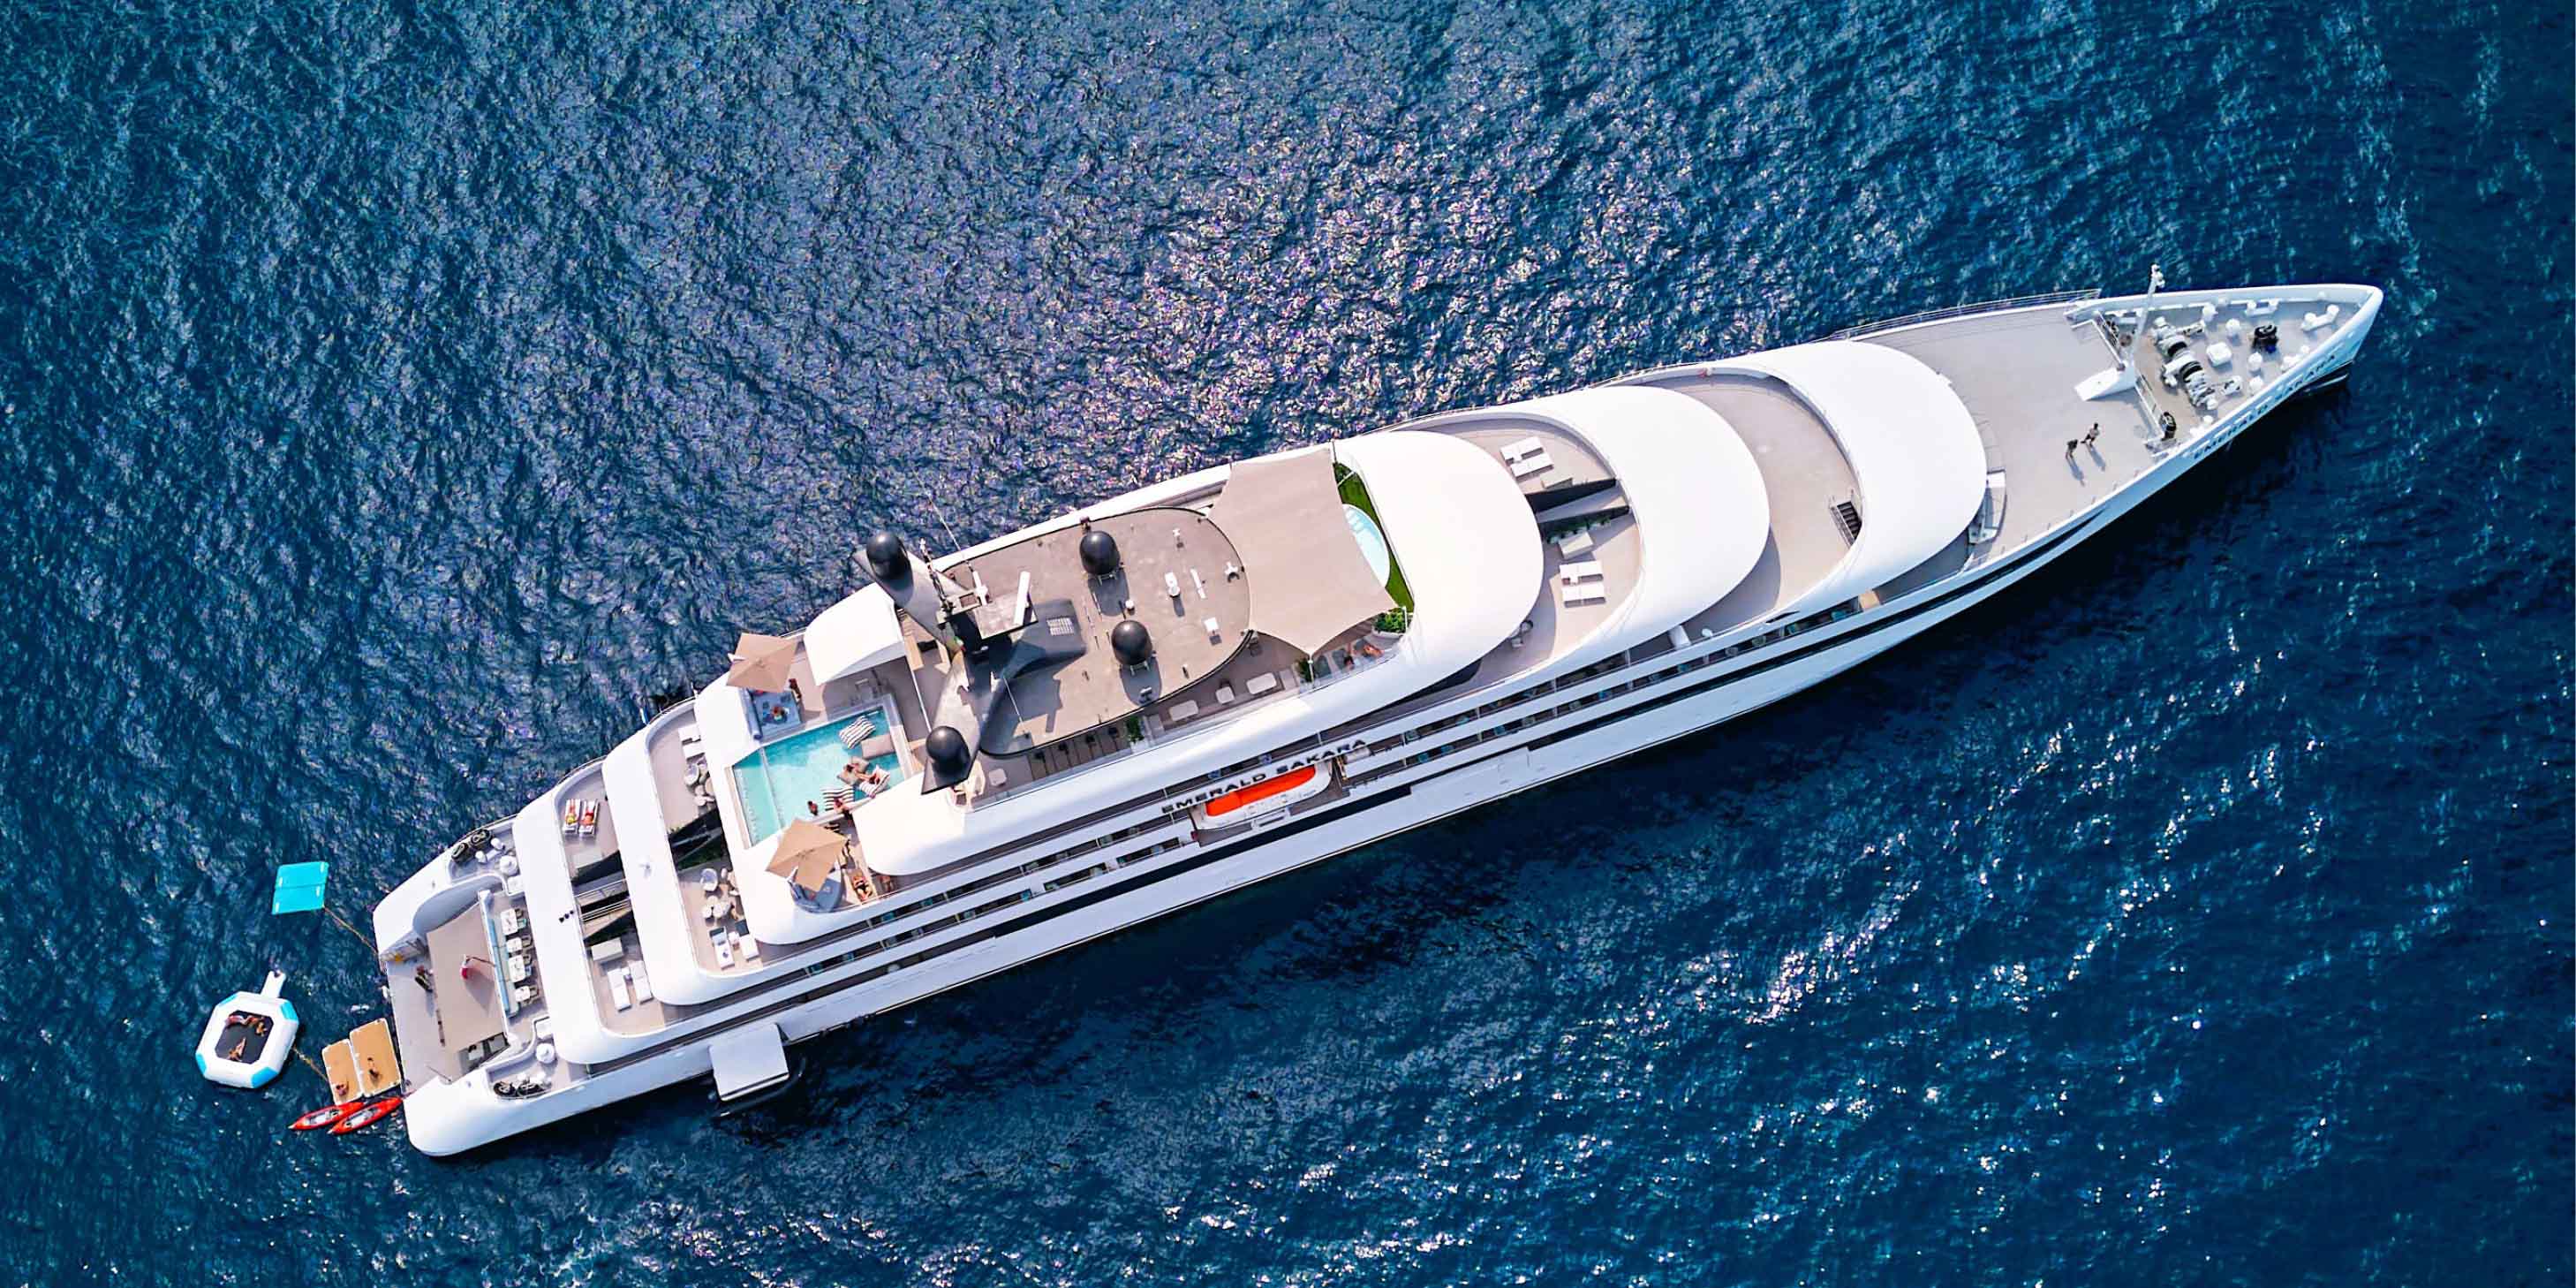 Man swimming in the pool on board a luxury yacht